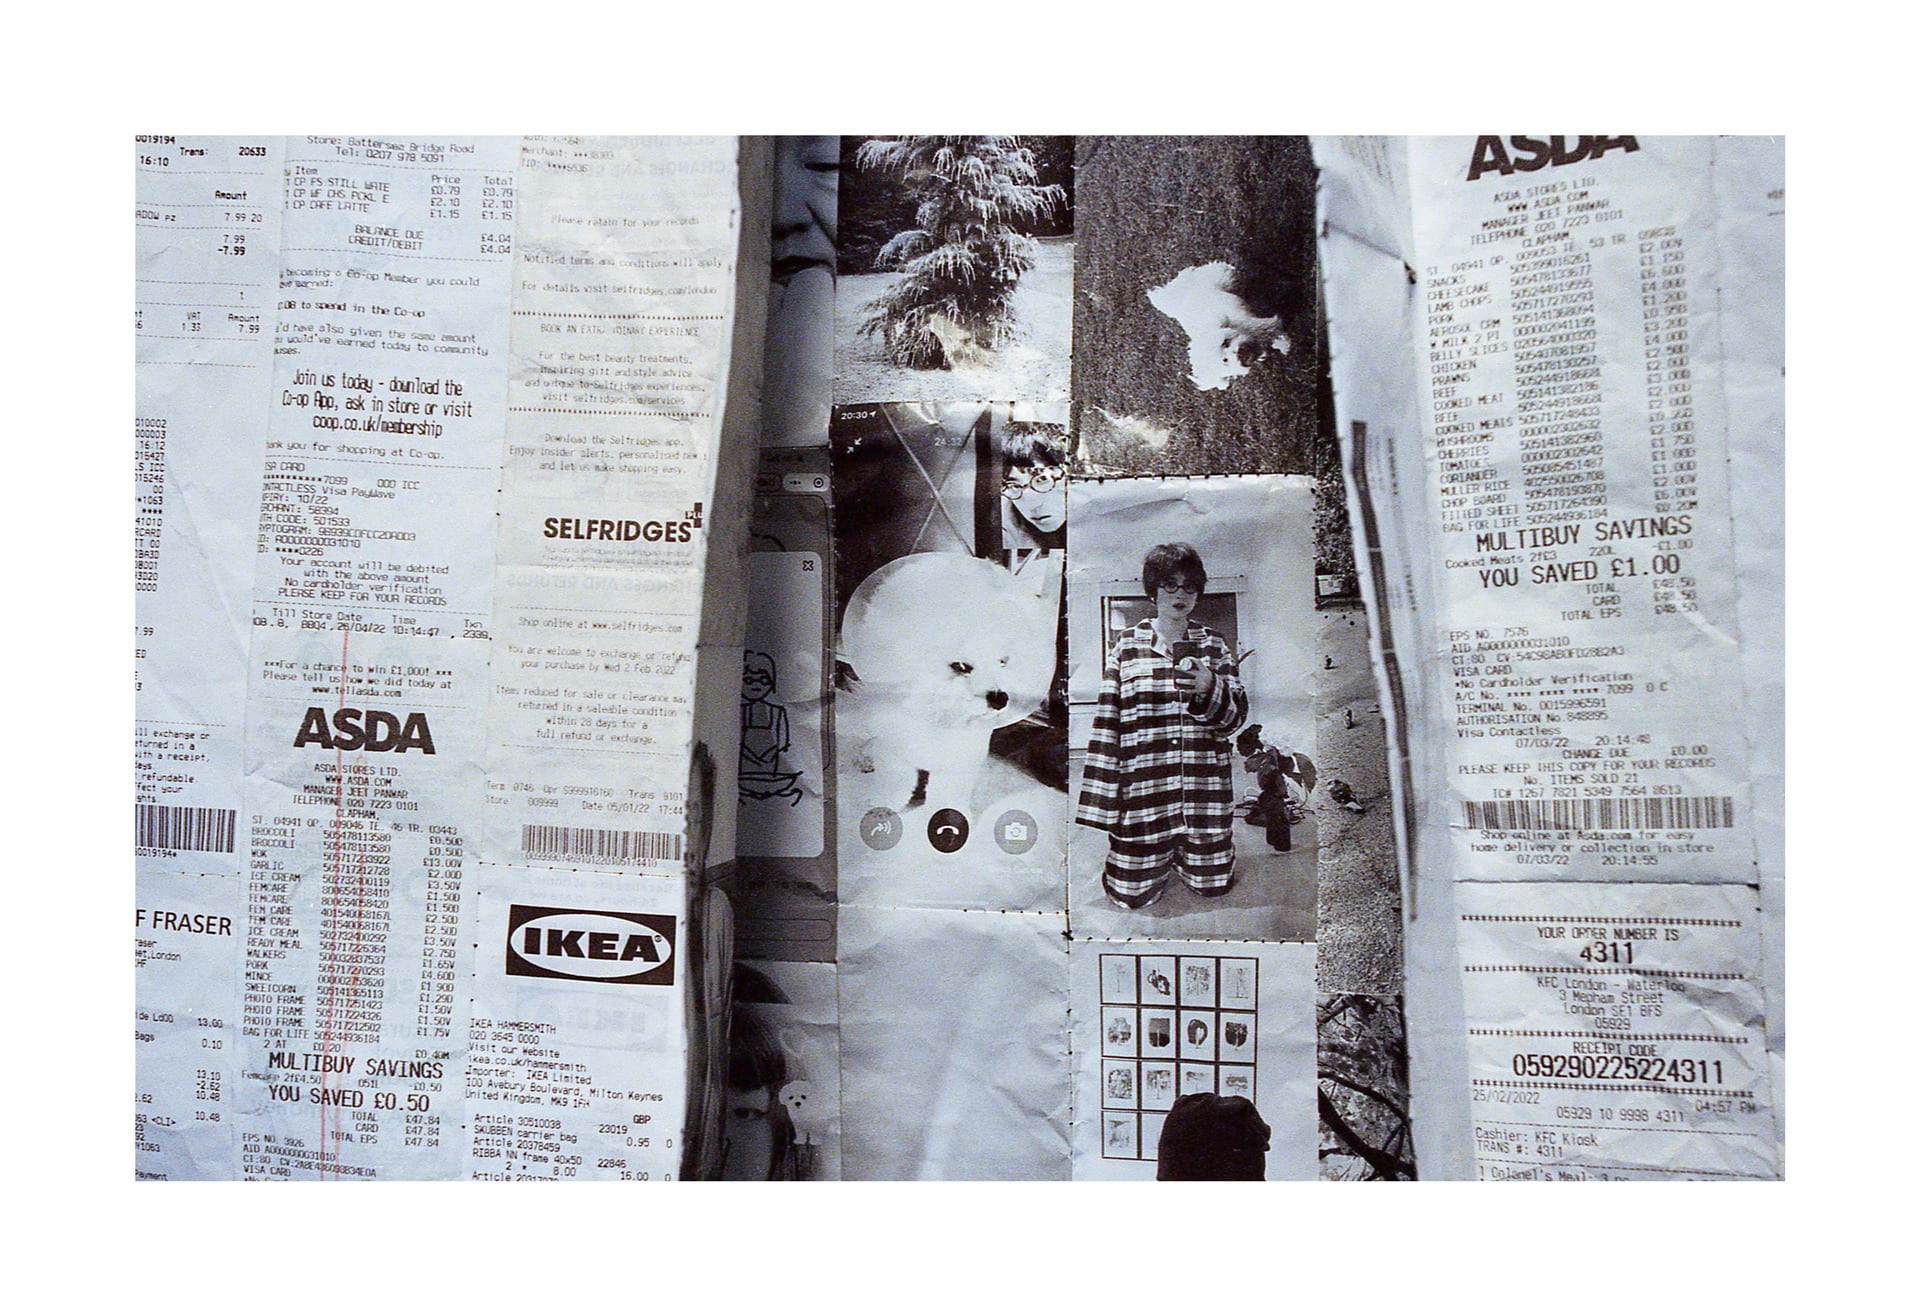 Aerial view of a collage of black and white photographic images lining what appears to be a slightly wonky rectangular open box, placed on a surface covered in a collage of shopping receipts. 